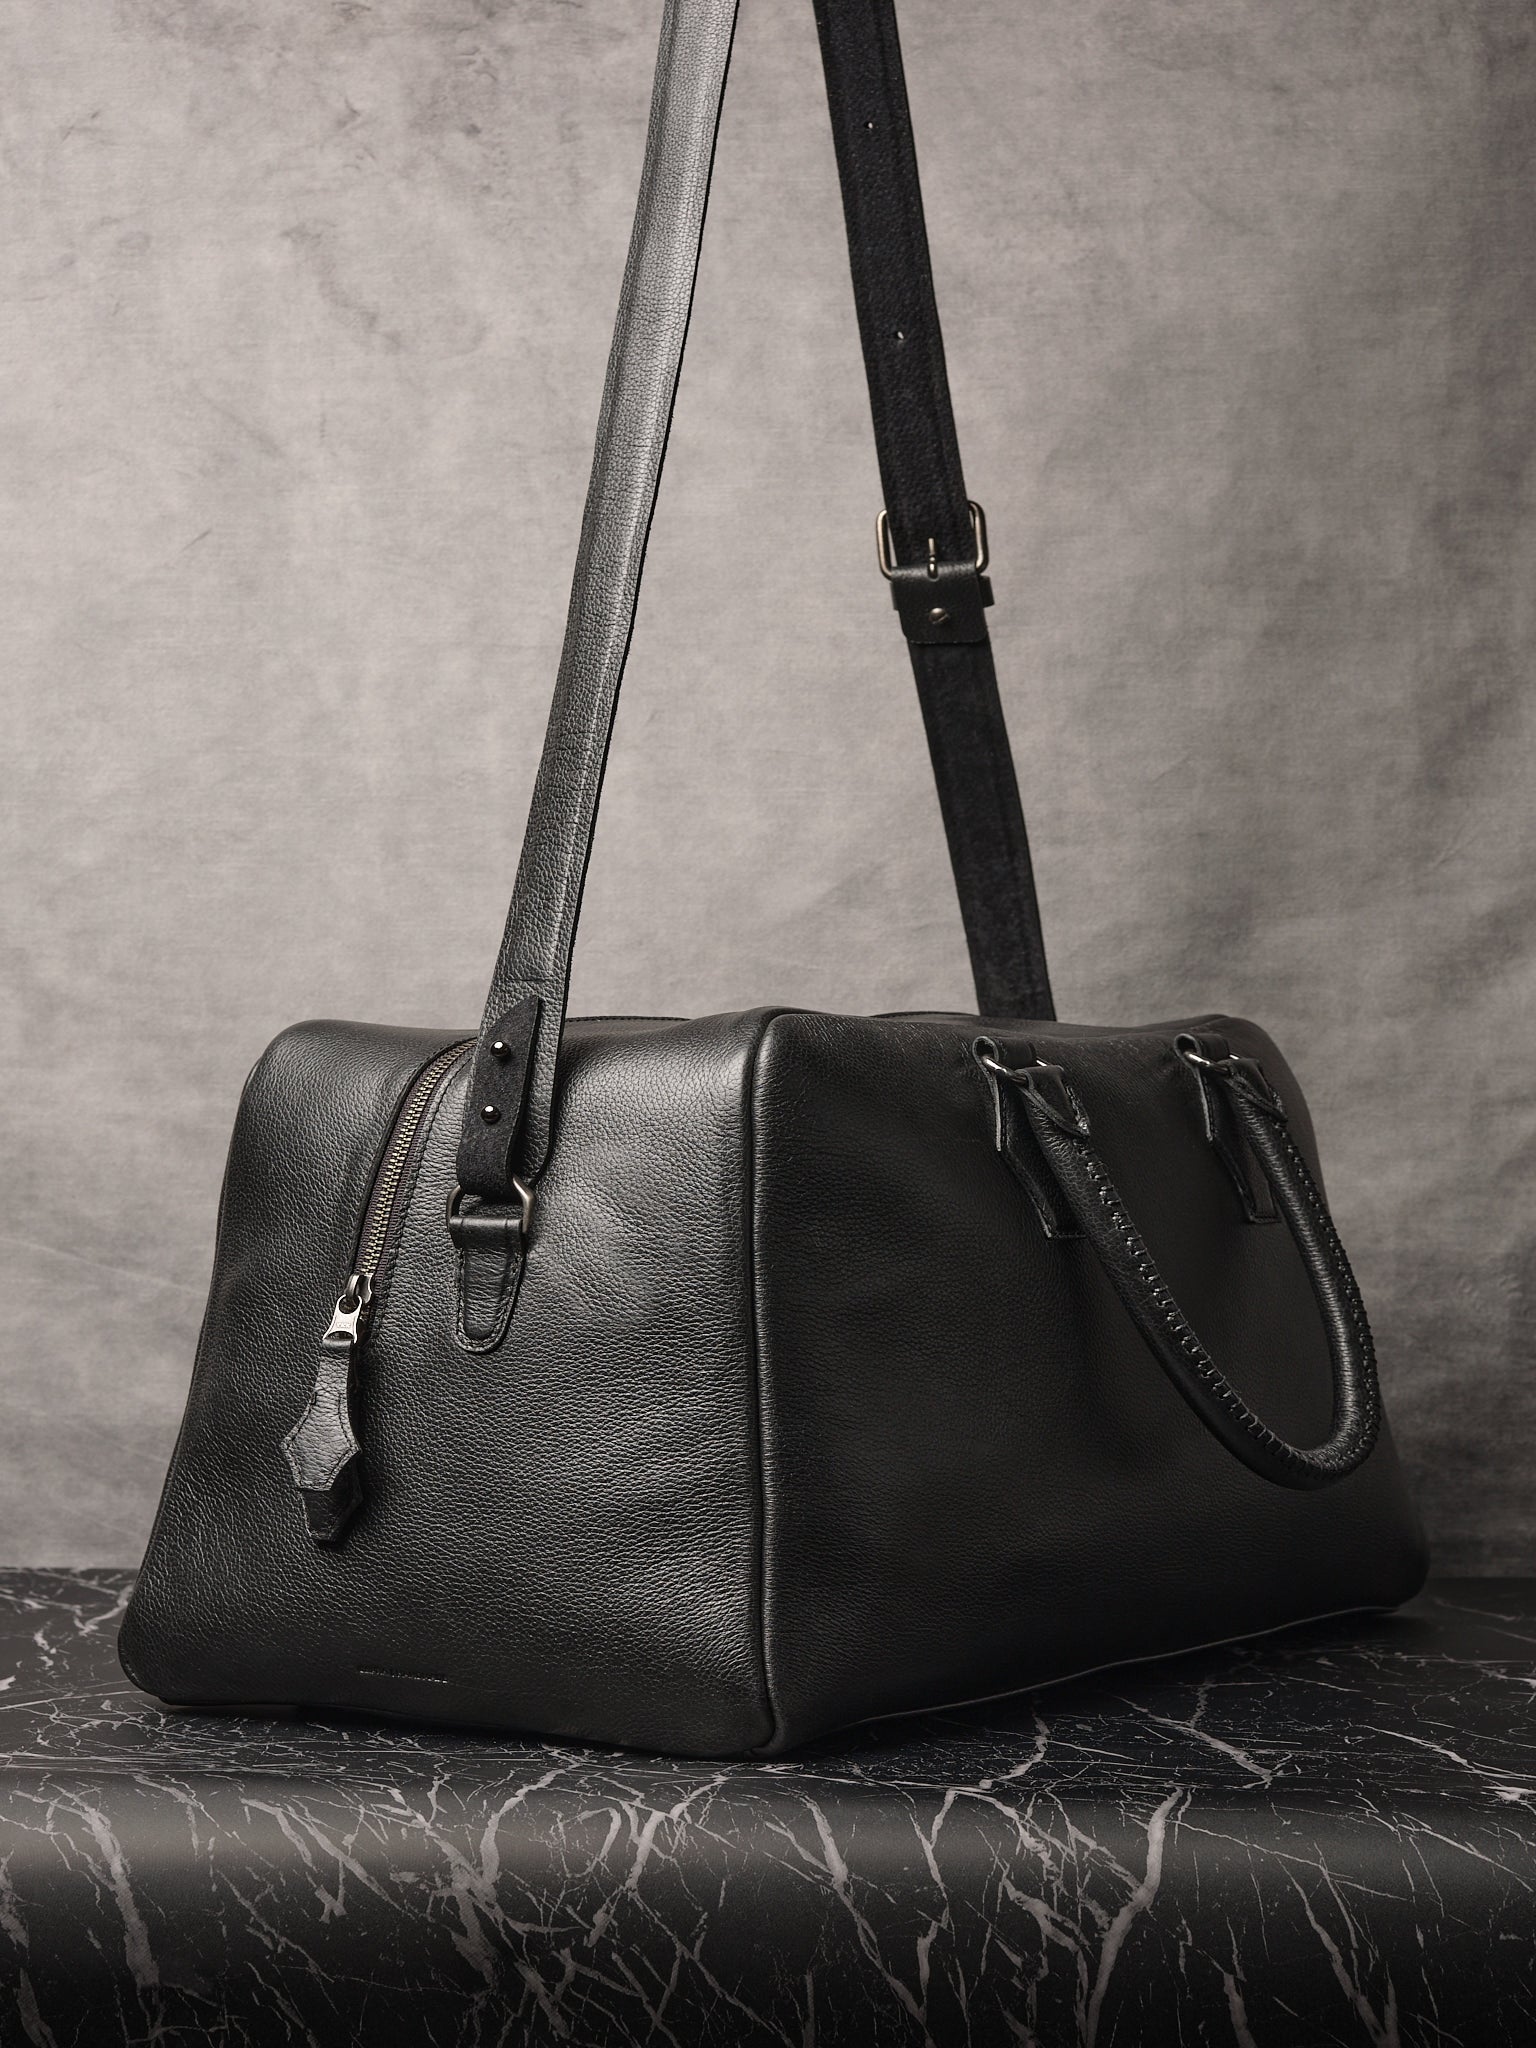 Leather Weekend Bag. Duffle Bag Travel Black by Capra Leather